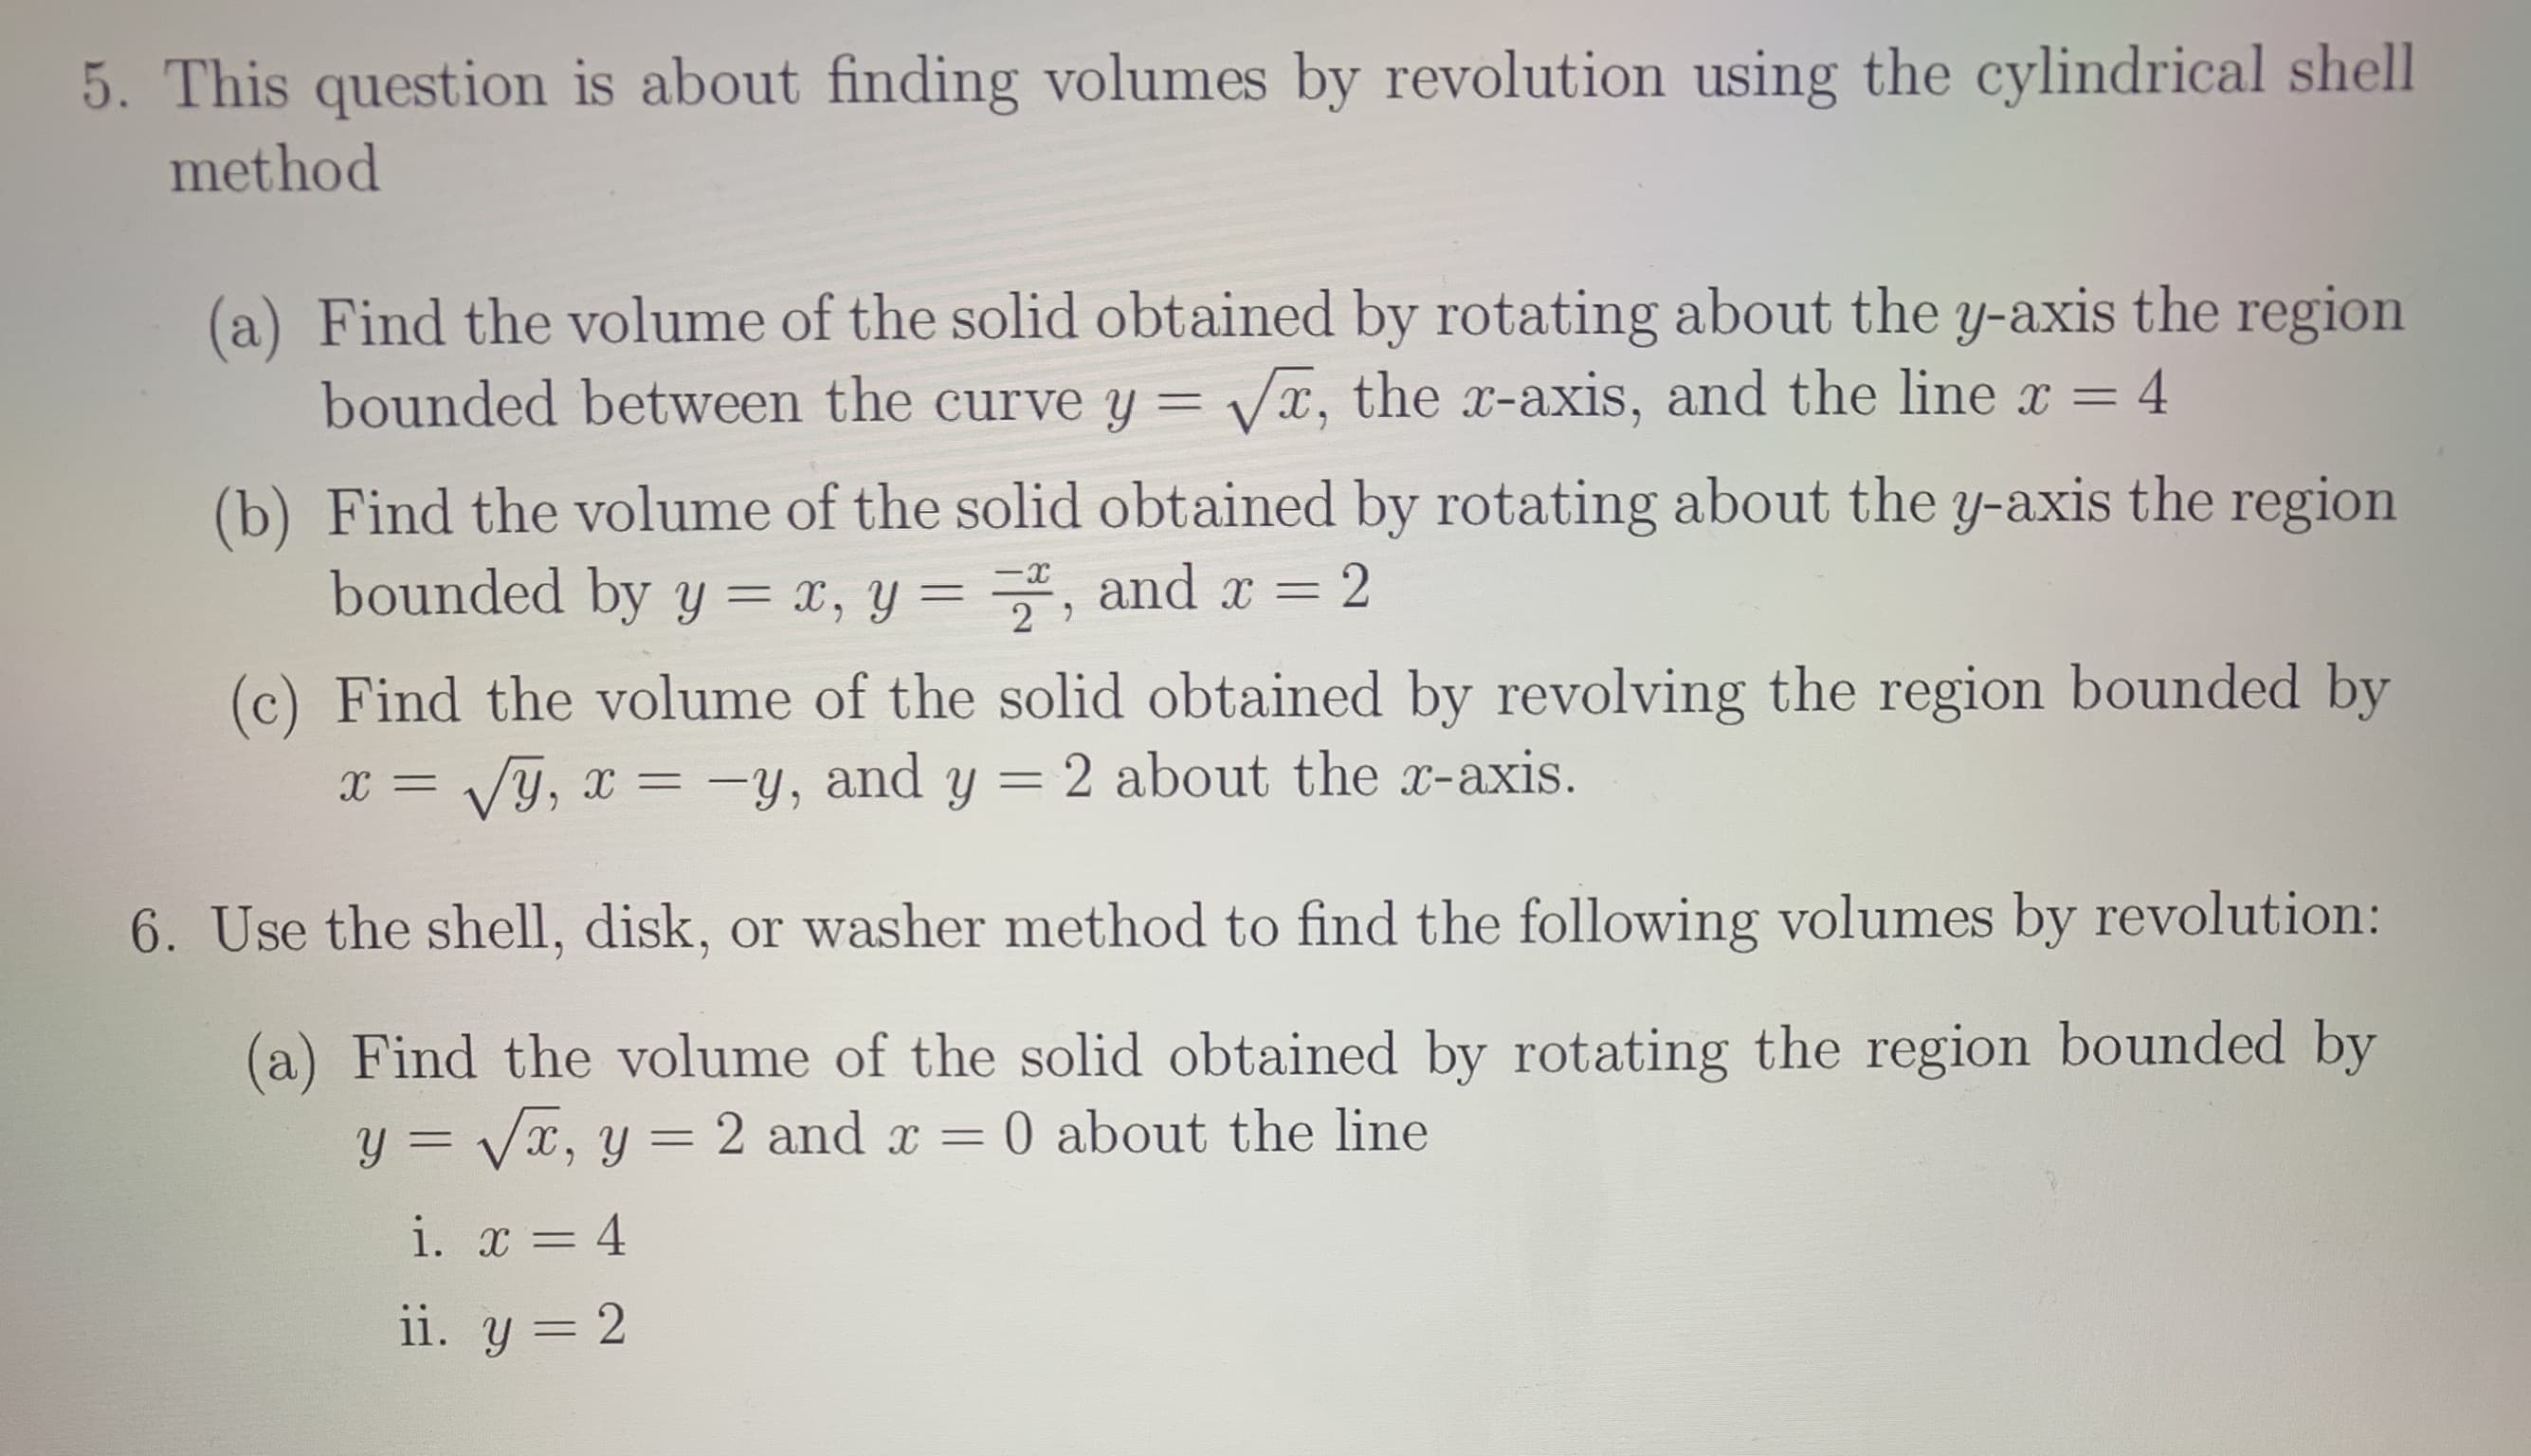 5. This question is about finding volumes by revolution using the cylindrical shell
method
(a) Find the volume of the solid obtained by rotating about the y-axis the region
bounded between the curve y = x, the x-axis, and the line x
4
(b) Find the volume of the solid obtained by rotating about the y-axis the region
bounded by y = x, y = , and
x 2
2
(c) Find the volume of the solid obtained by revolving the region bounded by
y, and y = 2 about the x-axis.
Vy,
6. Use the shell, disk, or washer method to find the following volumes by revolution:
(a) Find the volume of the solid obtained by rotating the region bounded by
y=Vx, y
0 about the line
2 and x
i. 4
ii. y 2
